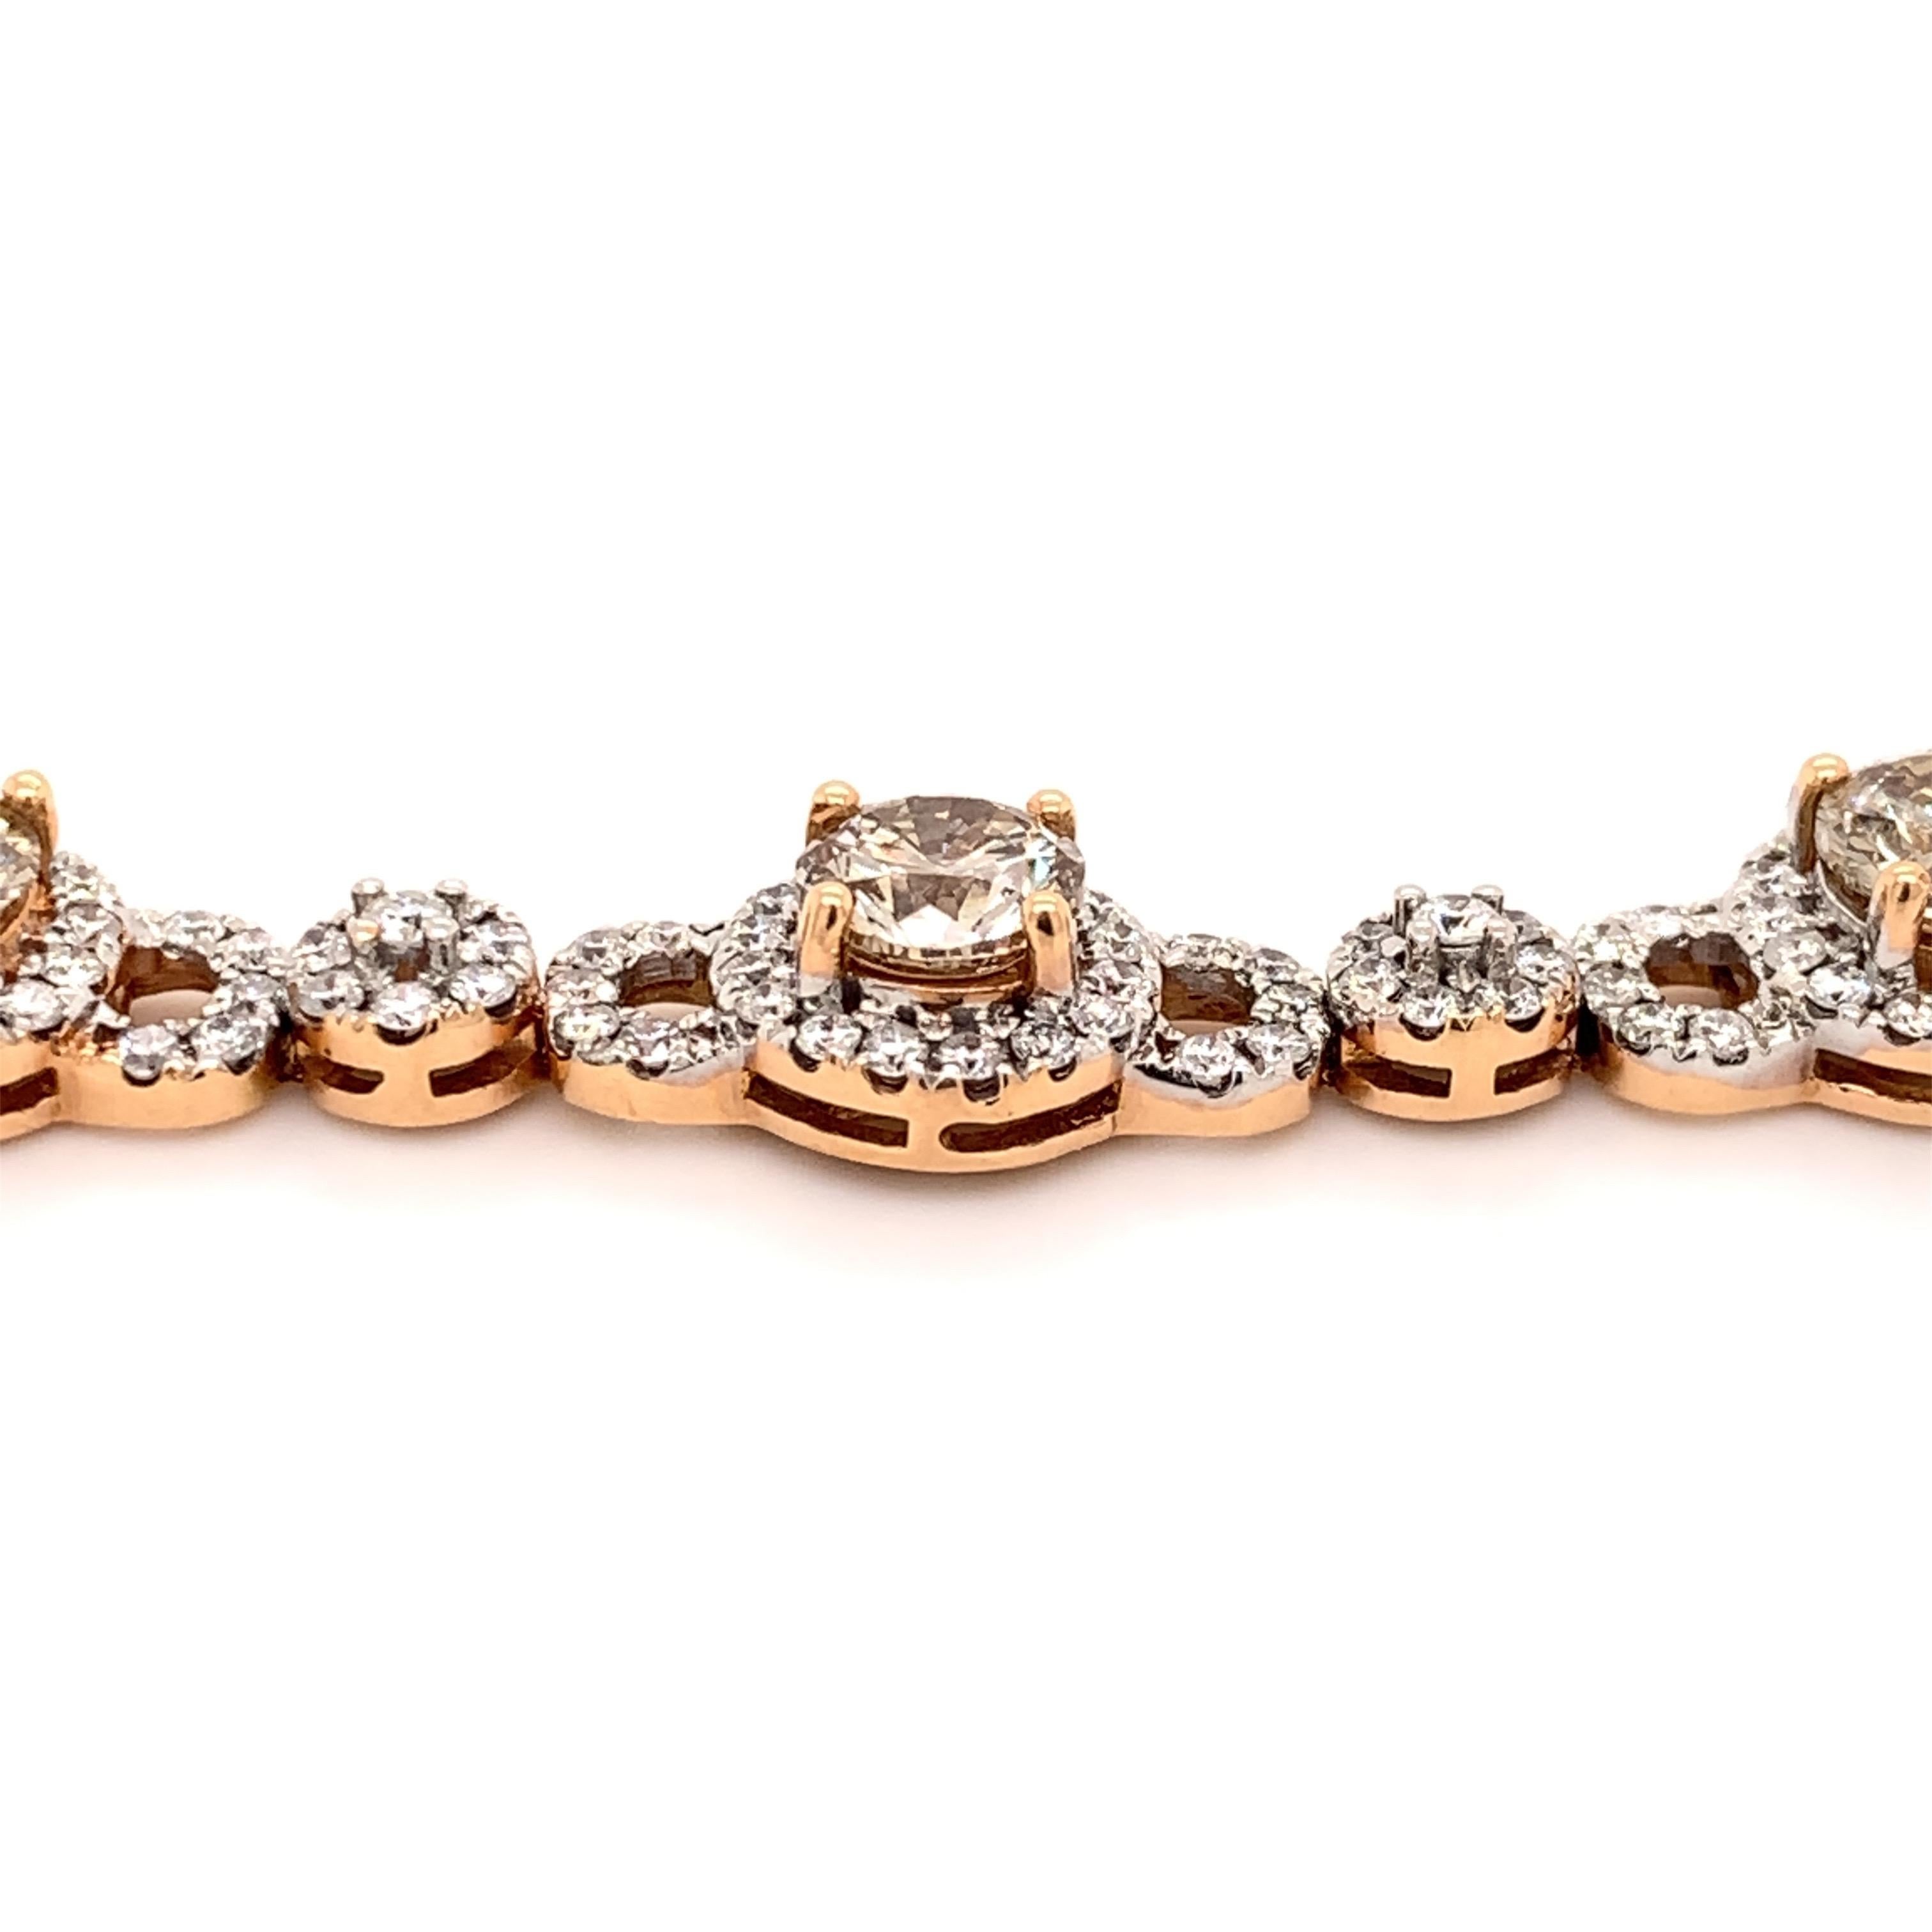 Glamorous fancy light brown diamond bracelet. Sparkling, round brilliant cut, natural 6.06 carats fancy light brown diamonds mounted in high profile basket with 4 bead prongs each, accented with round brilliant cut diamonds links. Beautiful